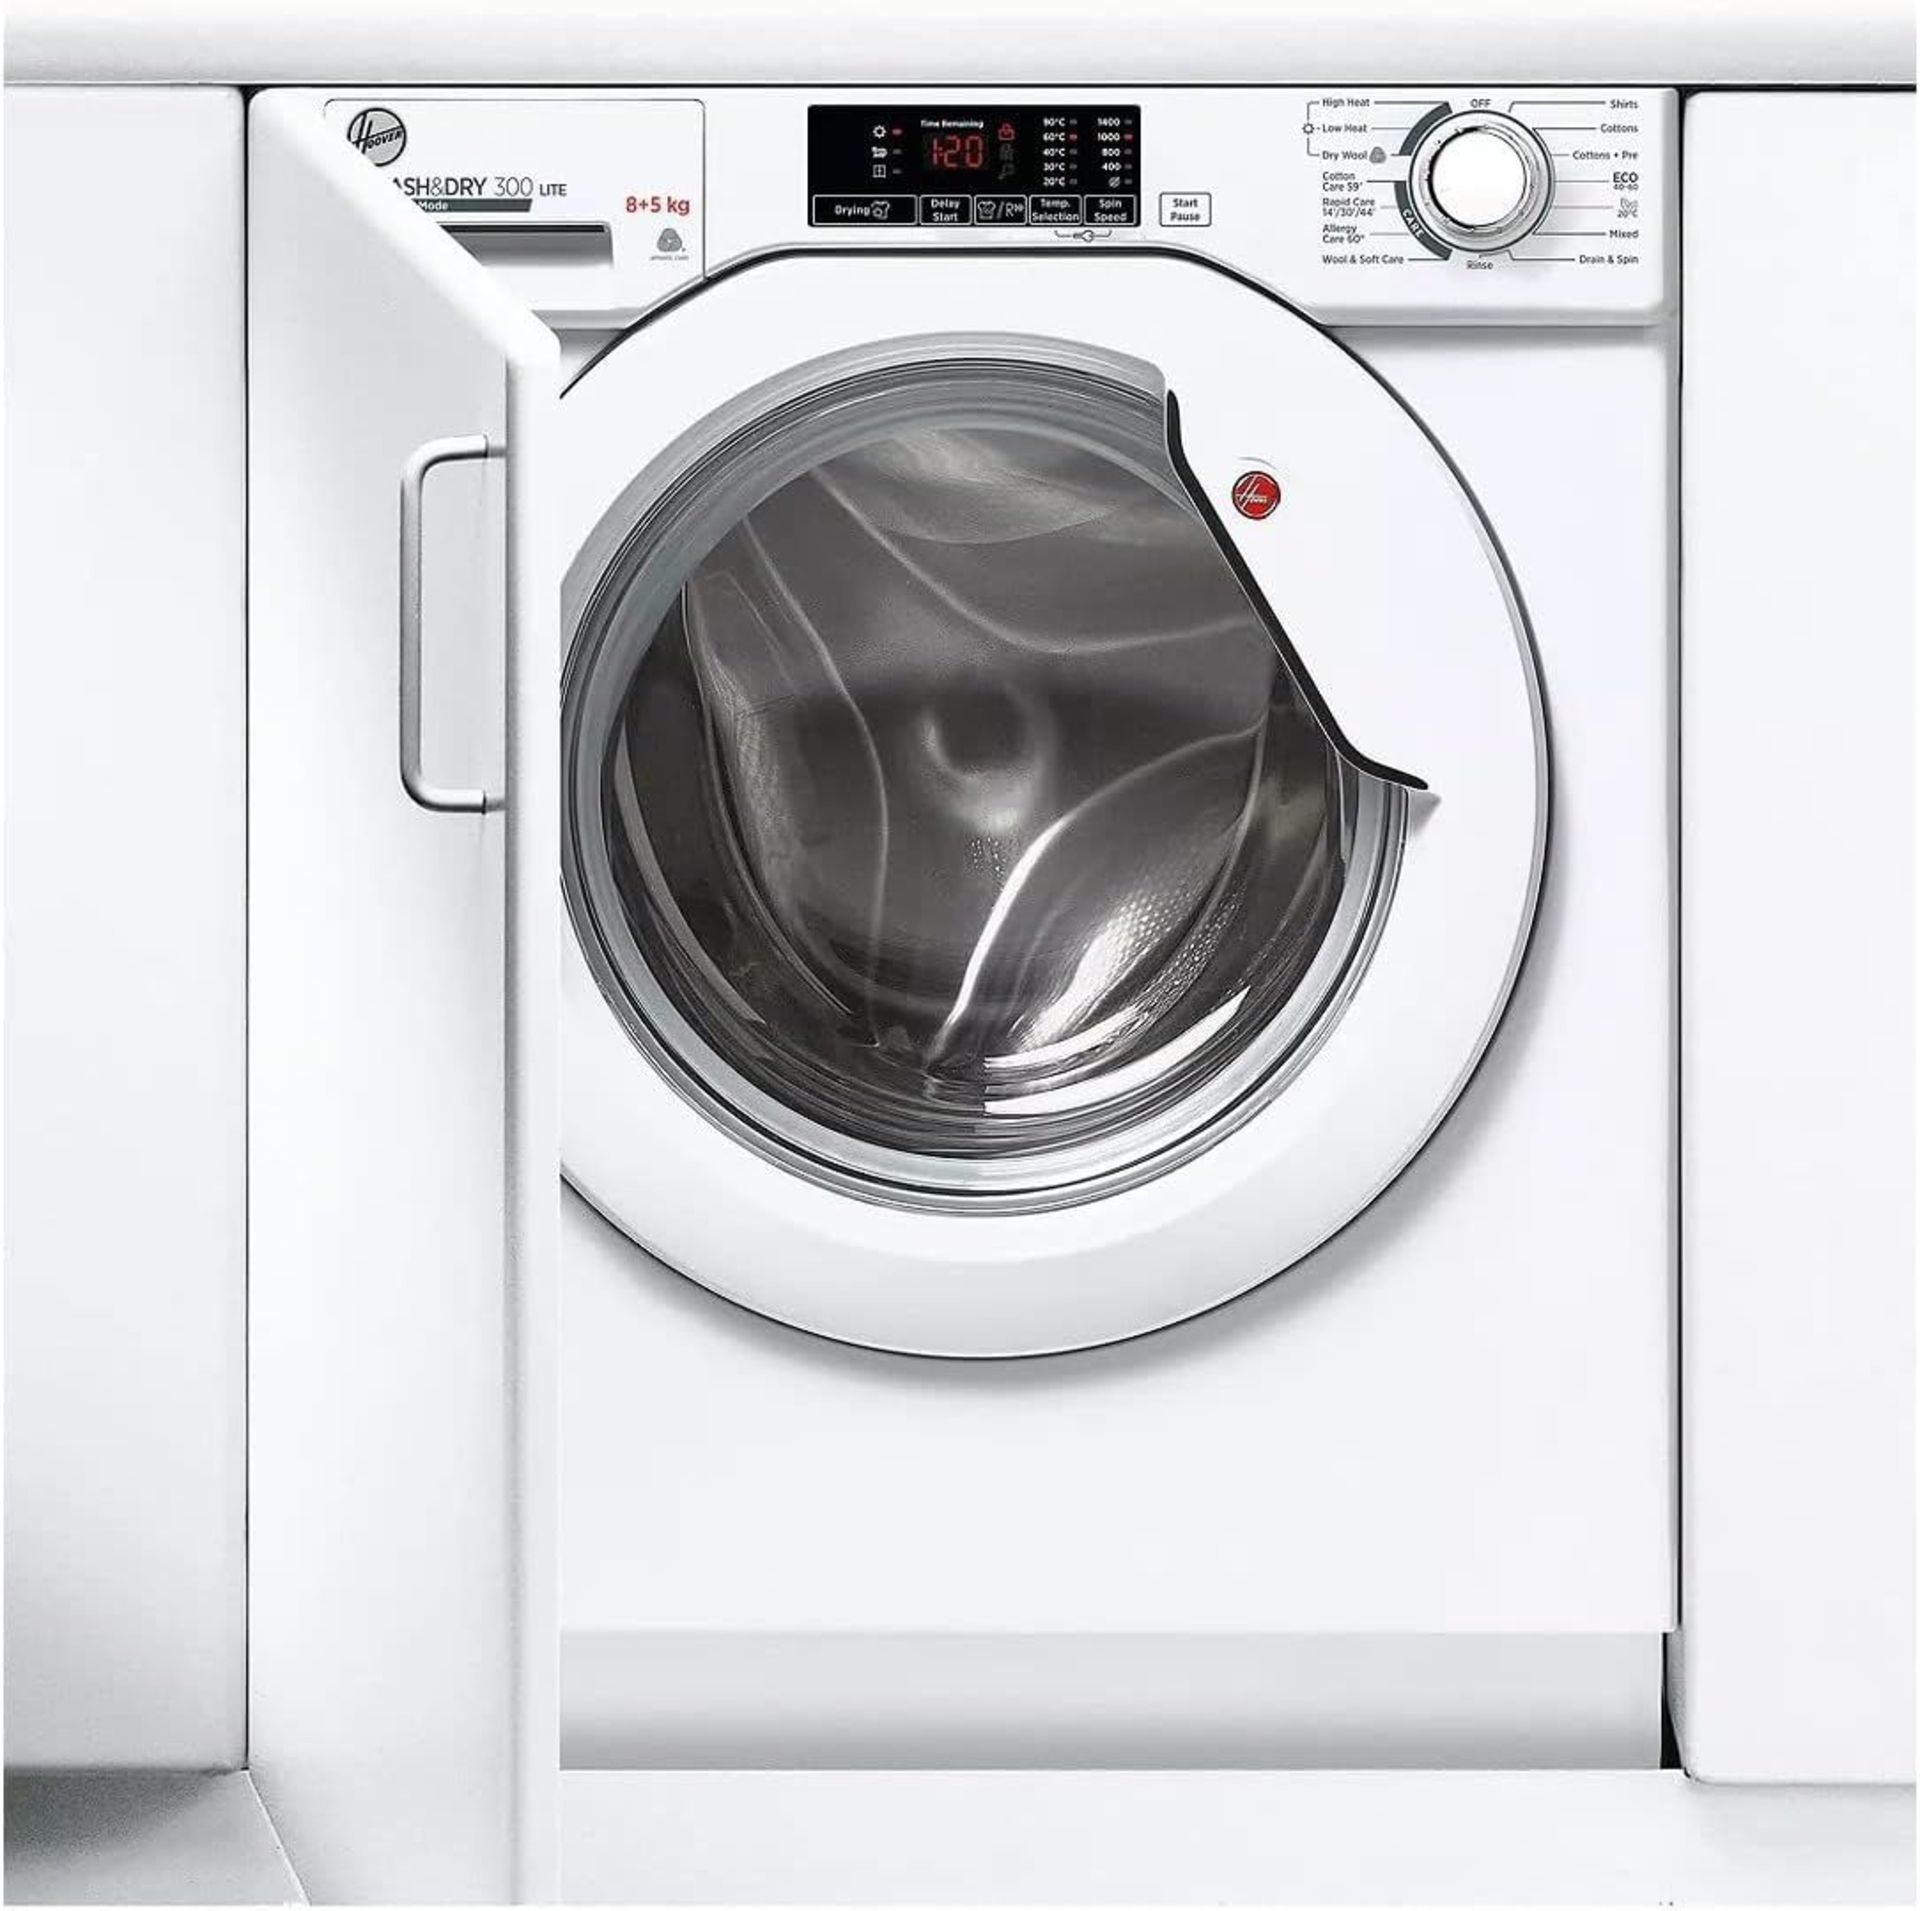 Hoover HBD 485D1E/1-80 8+5Kg 1400 Integrated Washer Dryer, White. - H/S. RRP £579.00. The Hoover HBD - Image 2 of 3